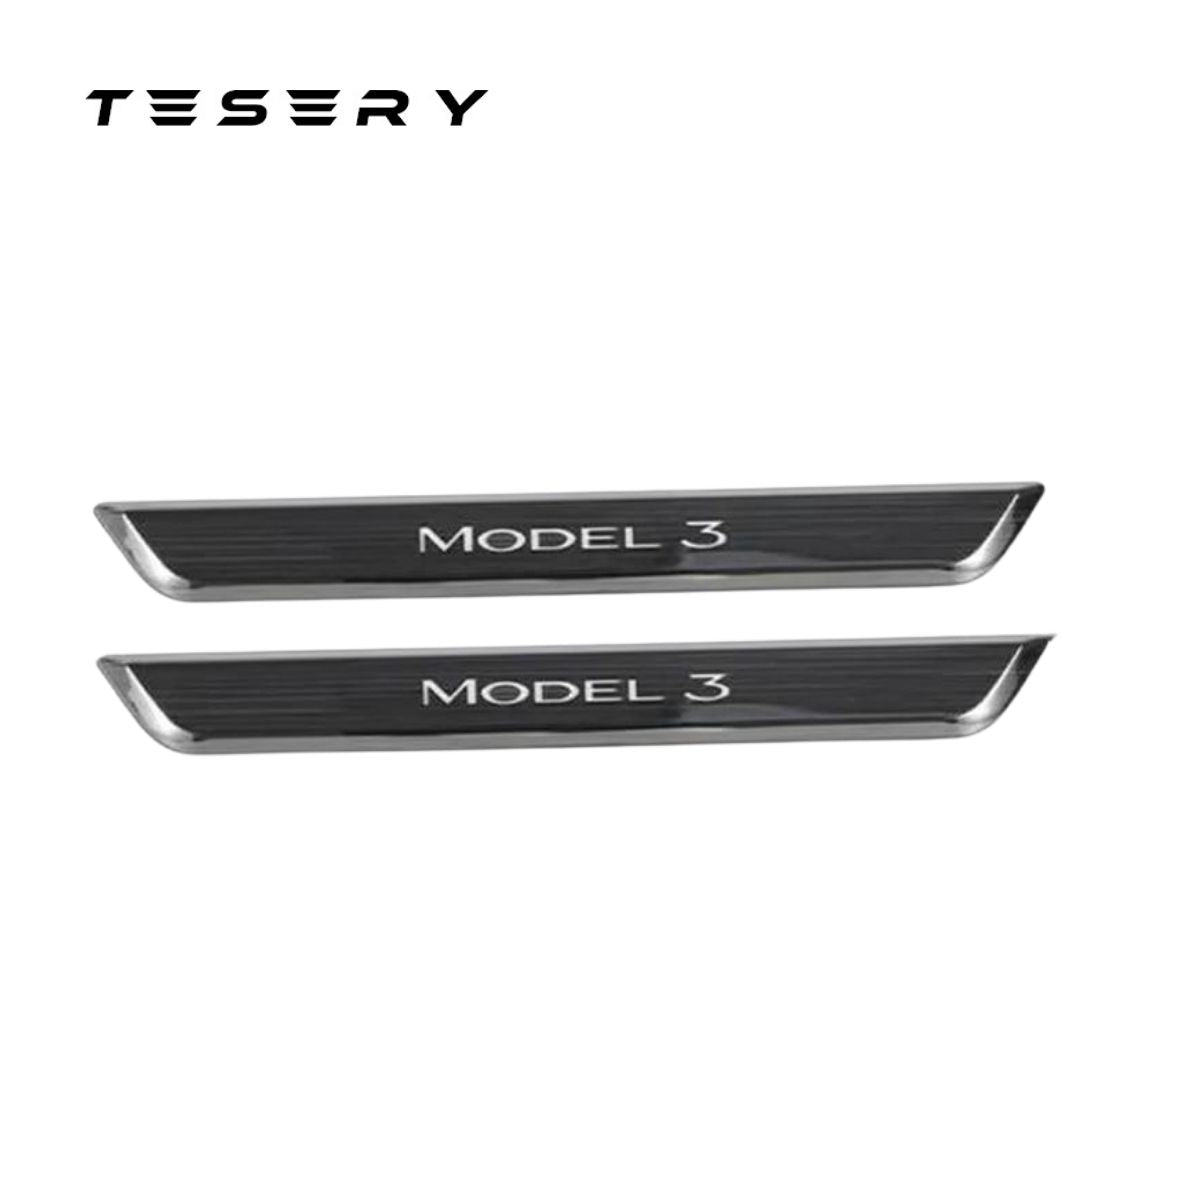 LED Illuminated Door Sill Protector Front Door for Model 3 / Y - Tesery Official Store